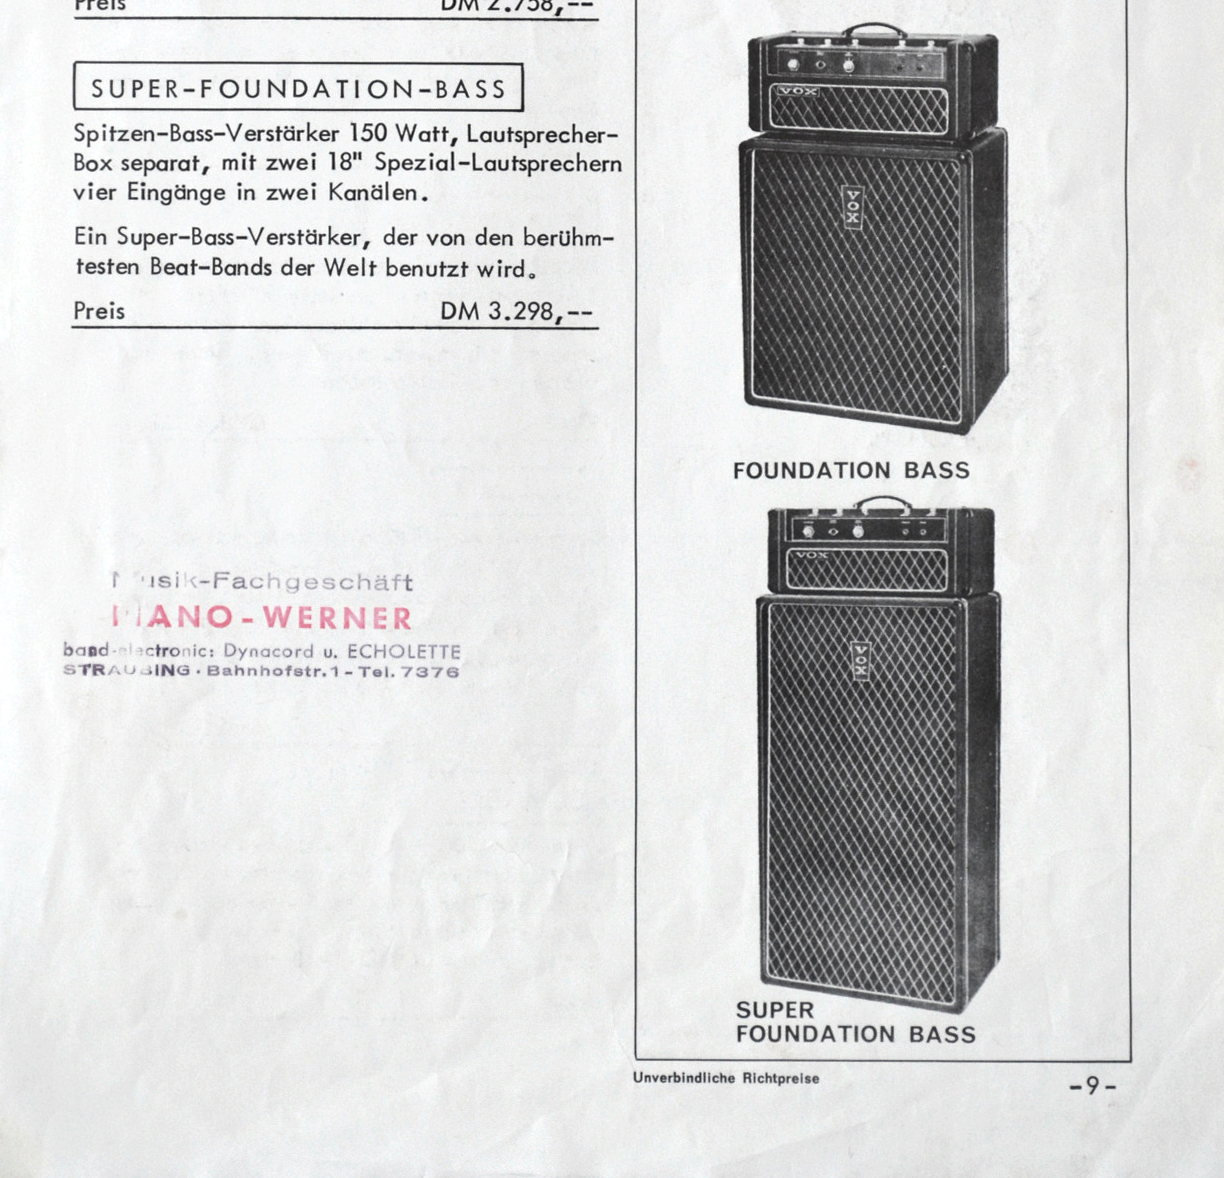 Vox catalogue issued in Germany, March 1967